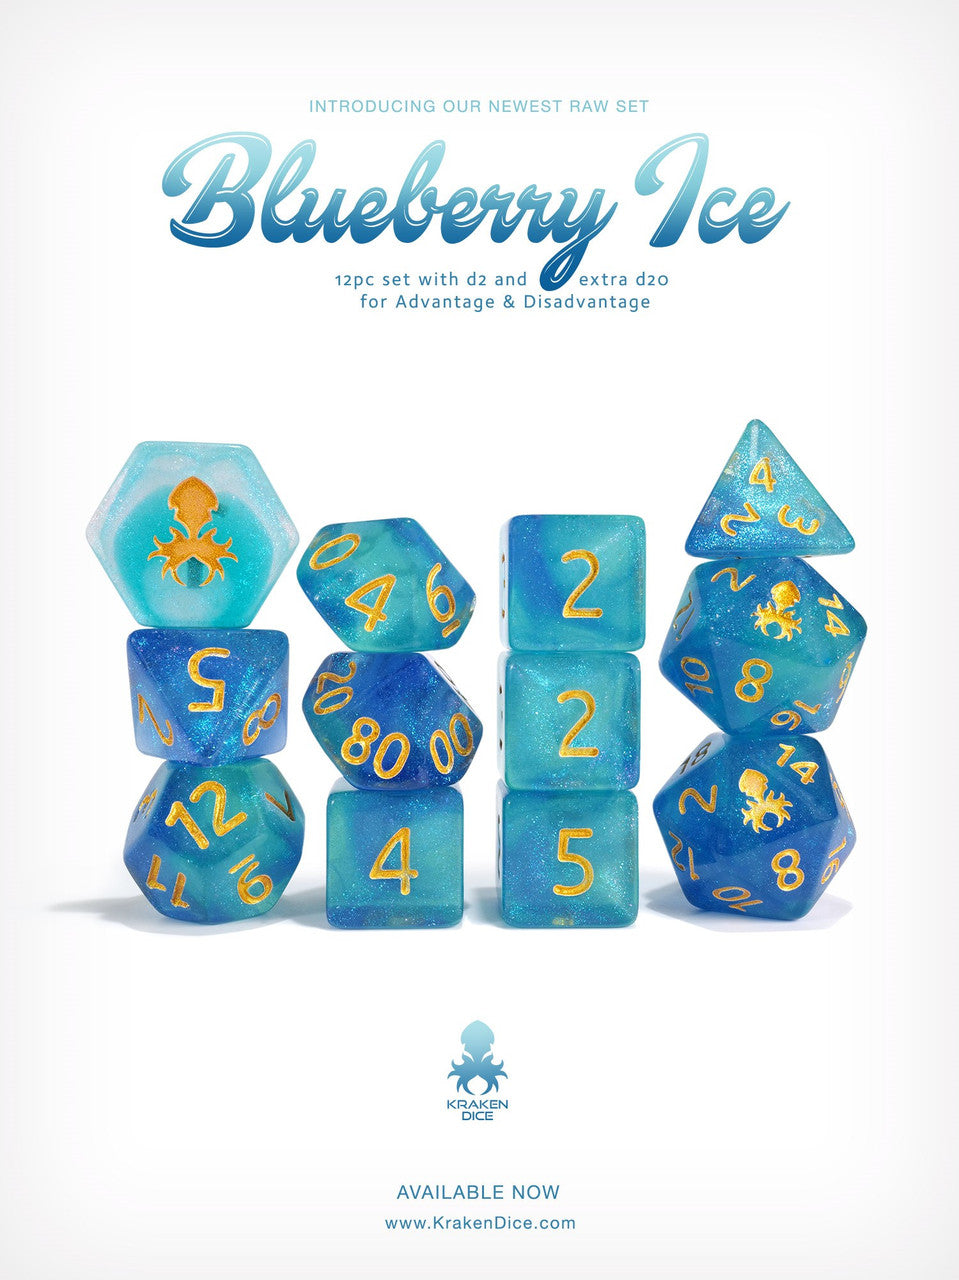 Kraken's Blueberry Ice Rock Candy 12pc Polyhedral Dice Set